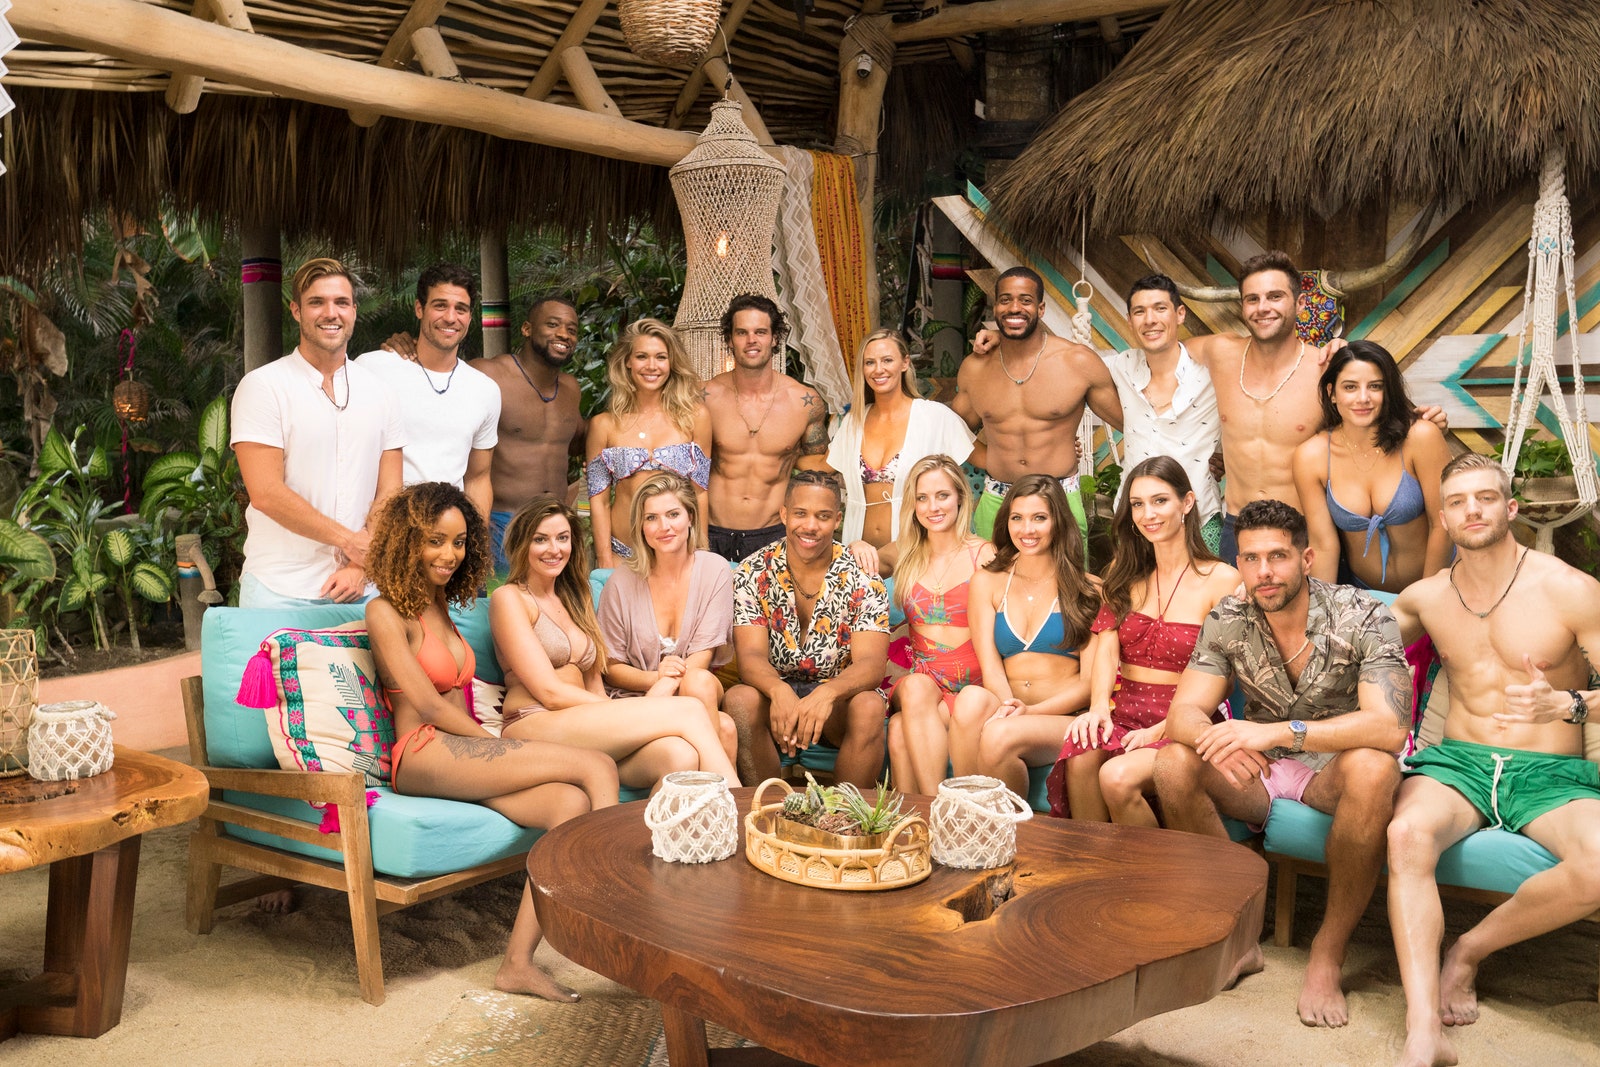 Noah 'breaks up' with Abigail ,' while Serena 'hooks up' with Joe on EPISODE ten of Bachelor in Paradise